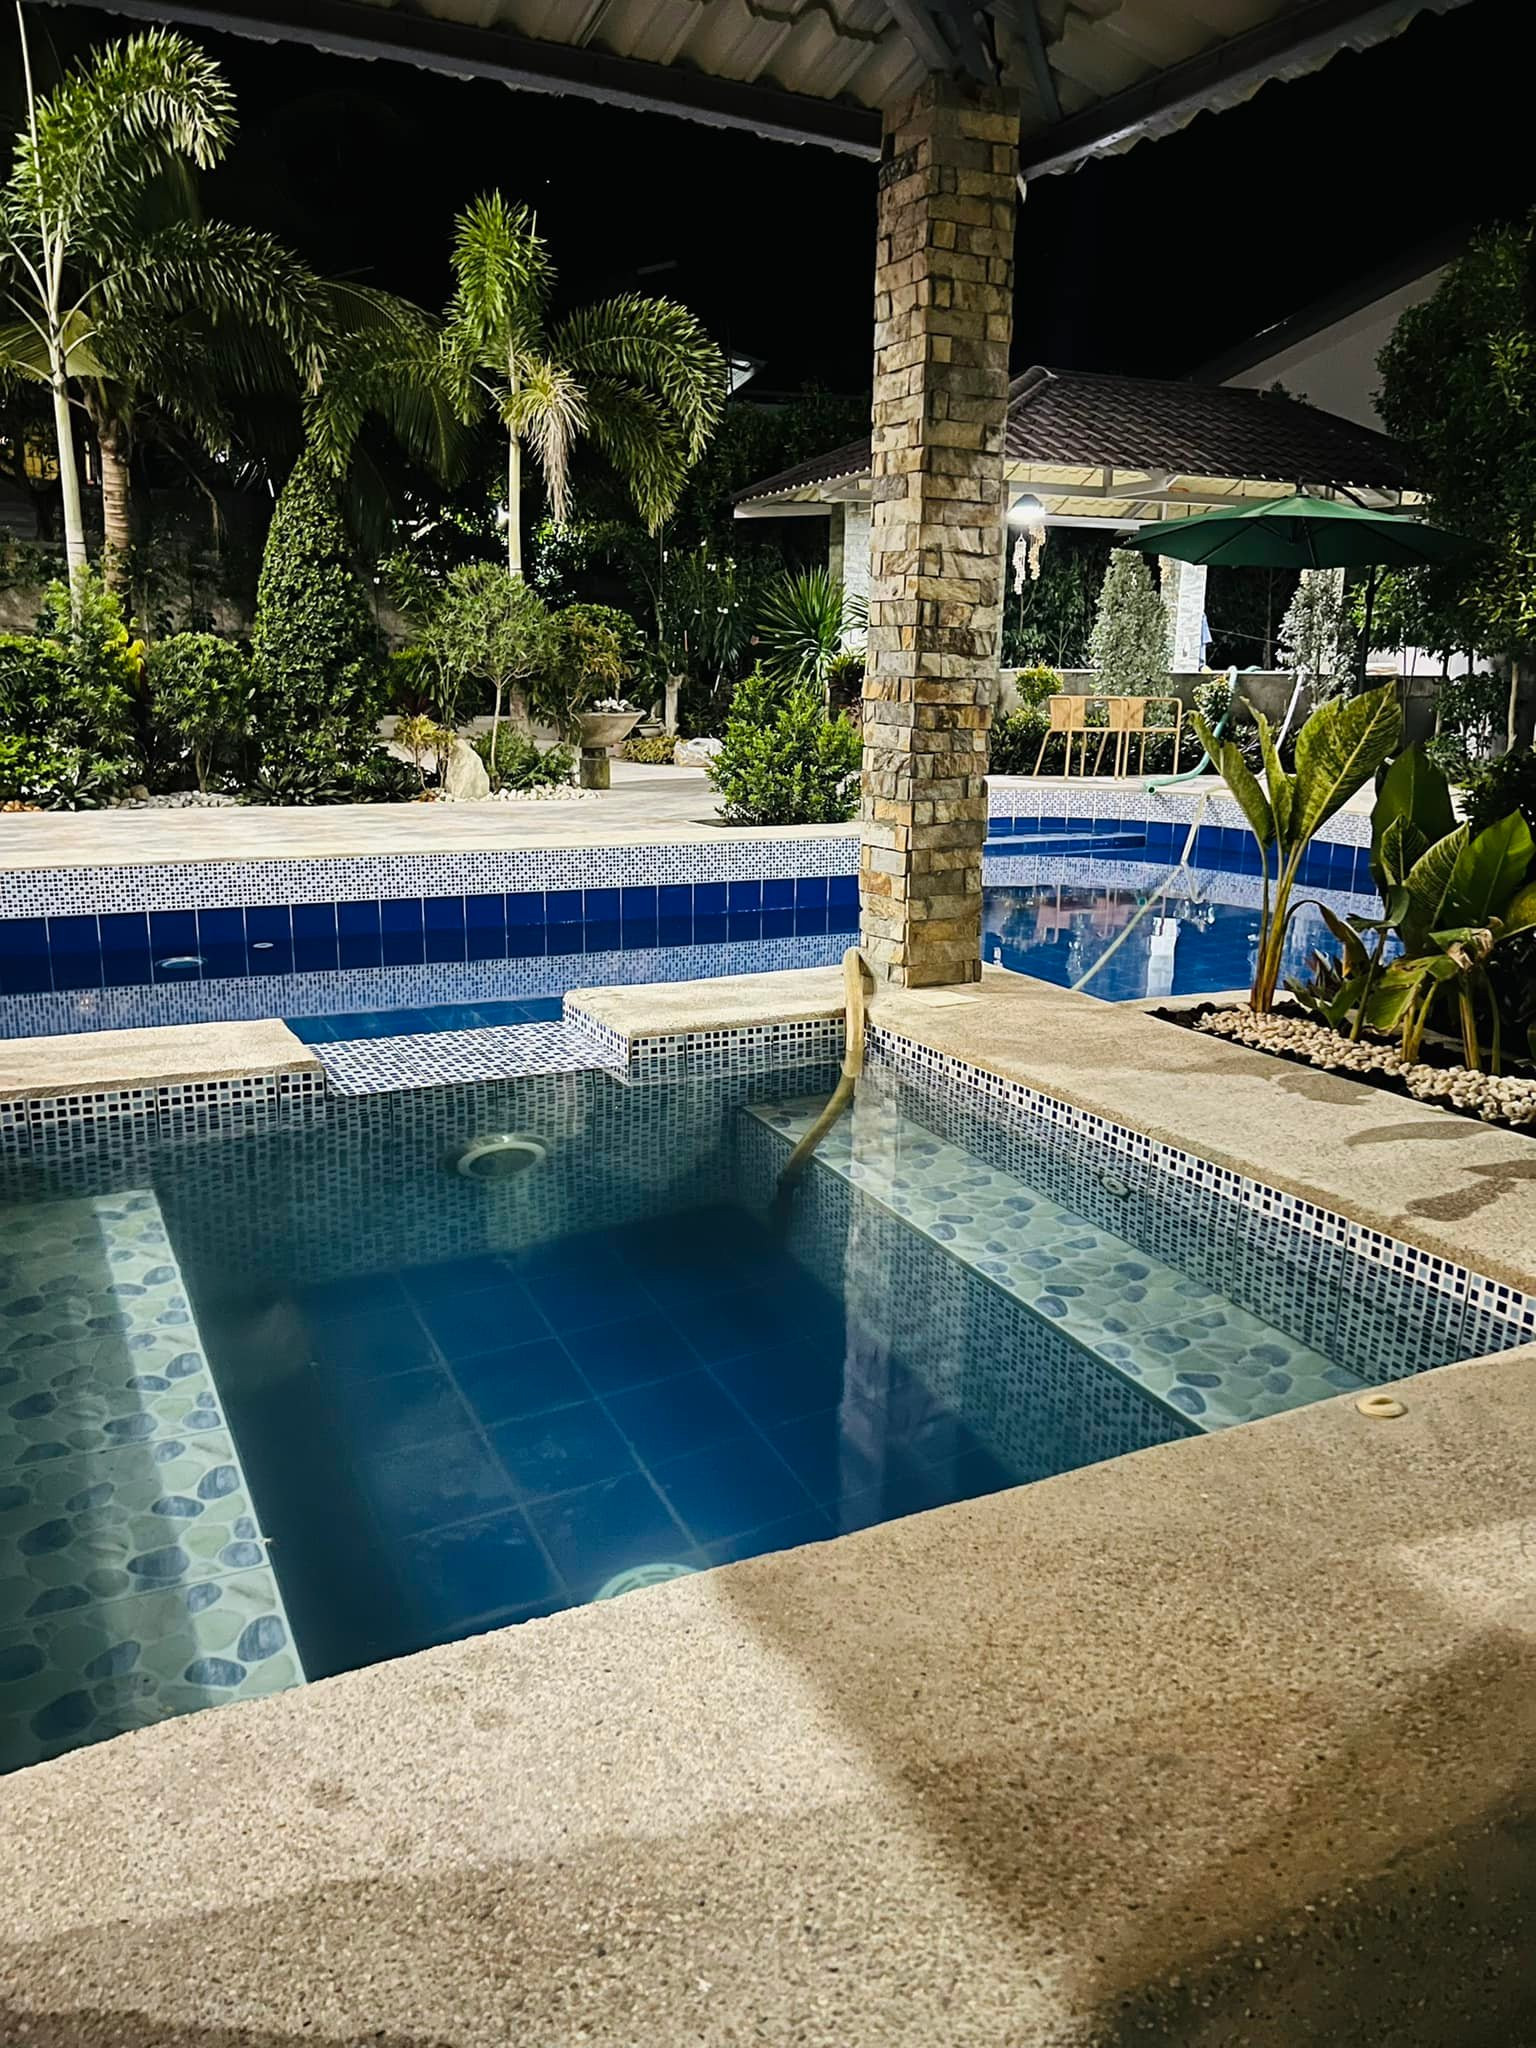 Apol & Cherie's events / private pool